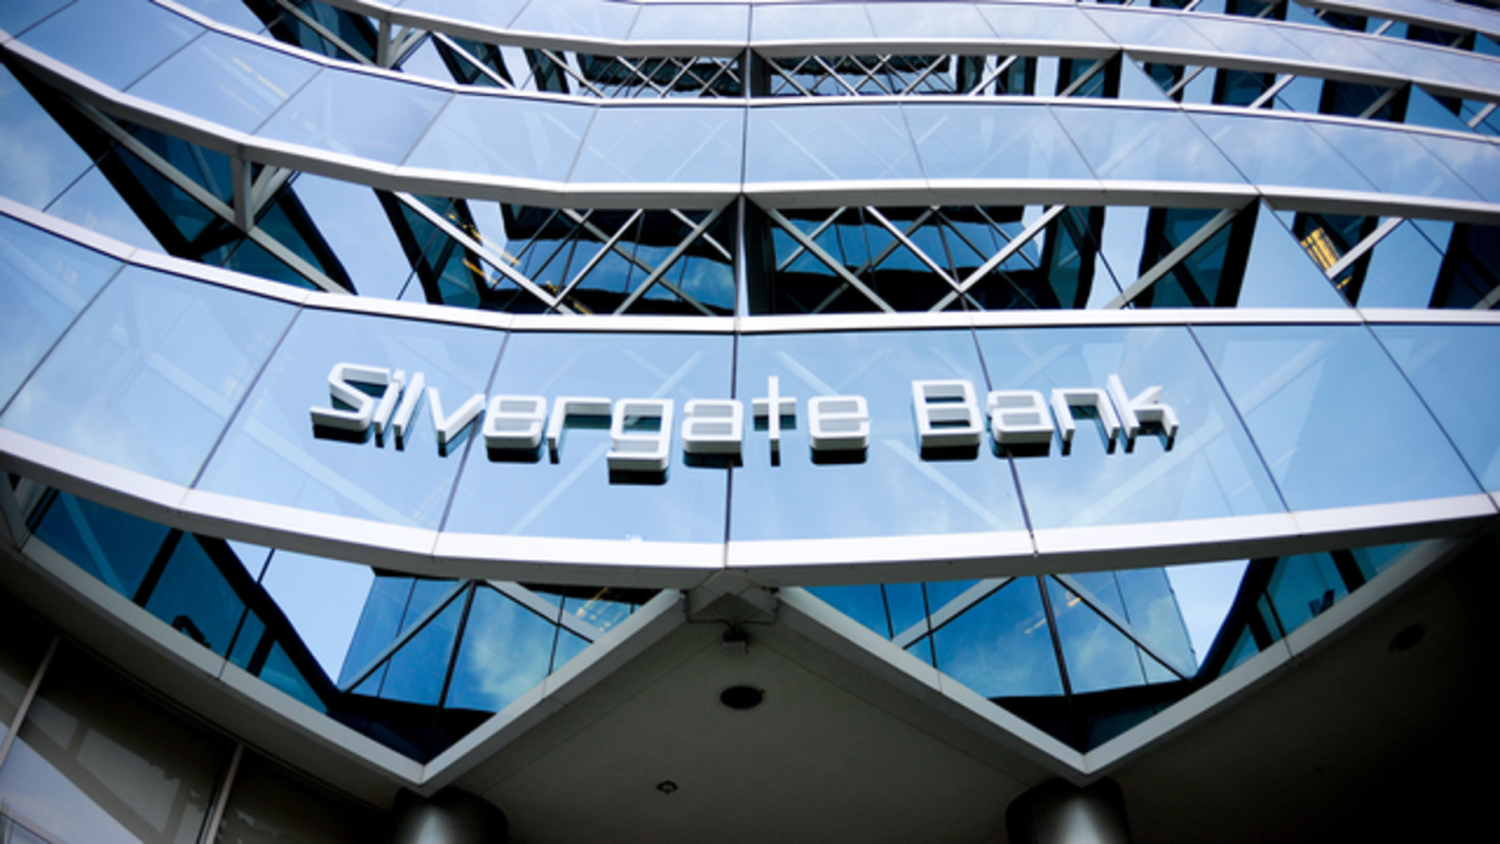 Silvergate Bank Adds 59 Crypto Clients, But Deposits Down $123 Million In Q4